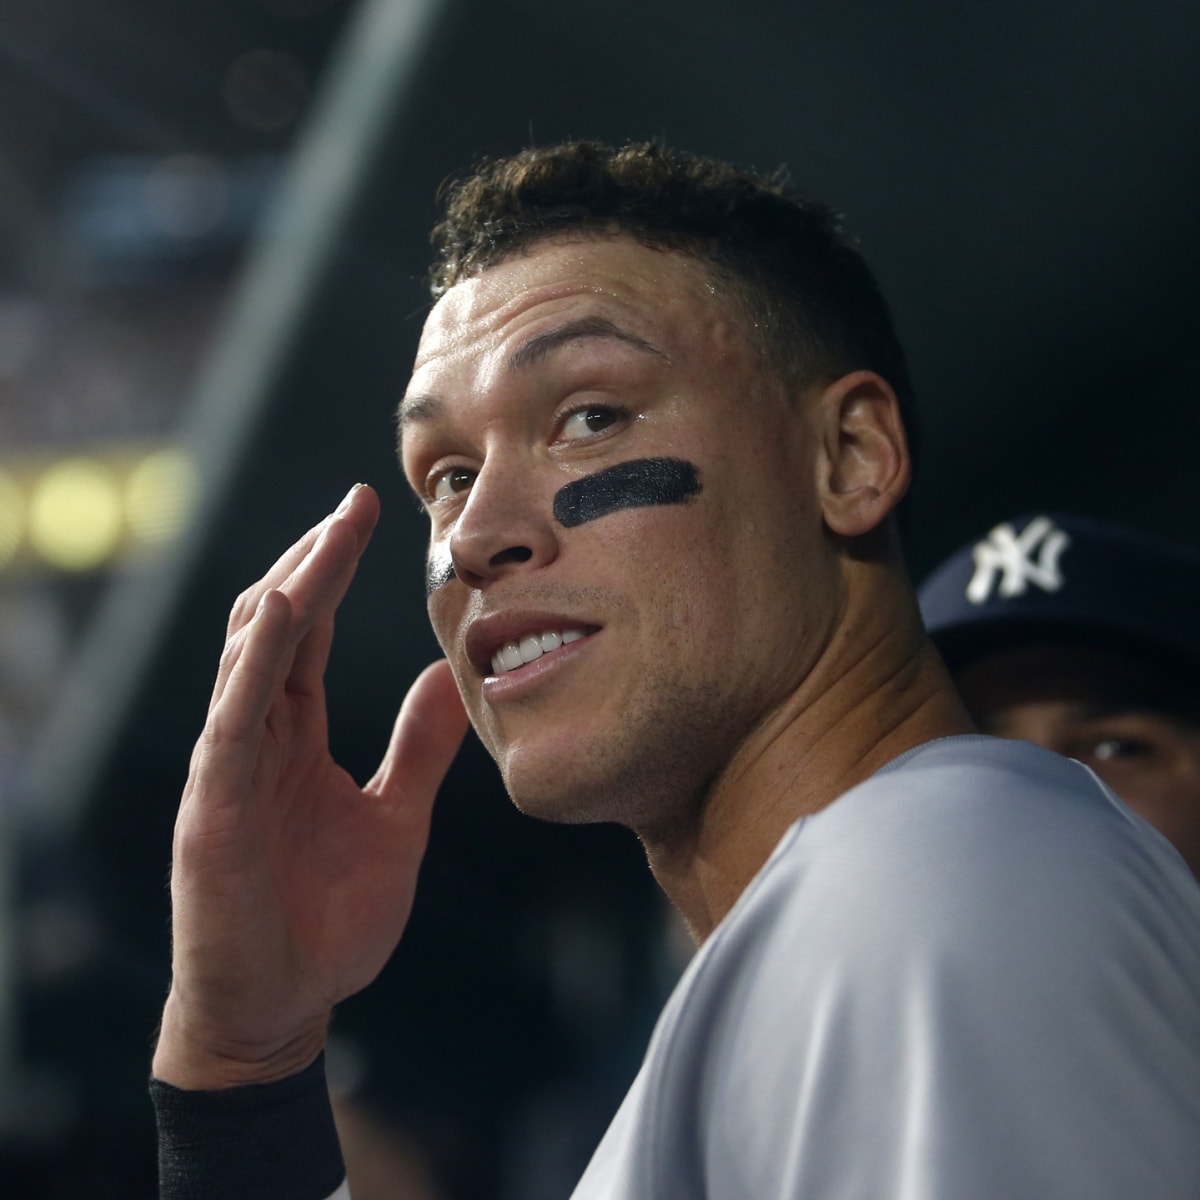 Fanatics Live with Aaron Judge!  Ever wonder what Aaron Judge's all time  favorite at-bat was? A fan got to ask him this very question during our  #FanaticsLive event with the New